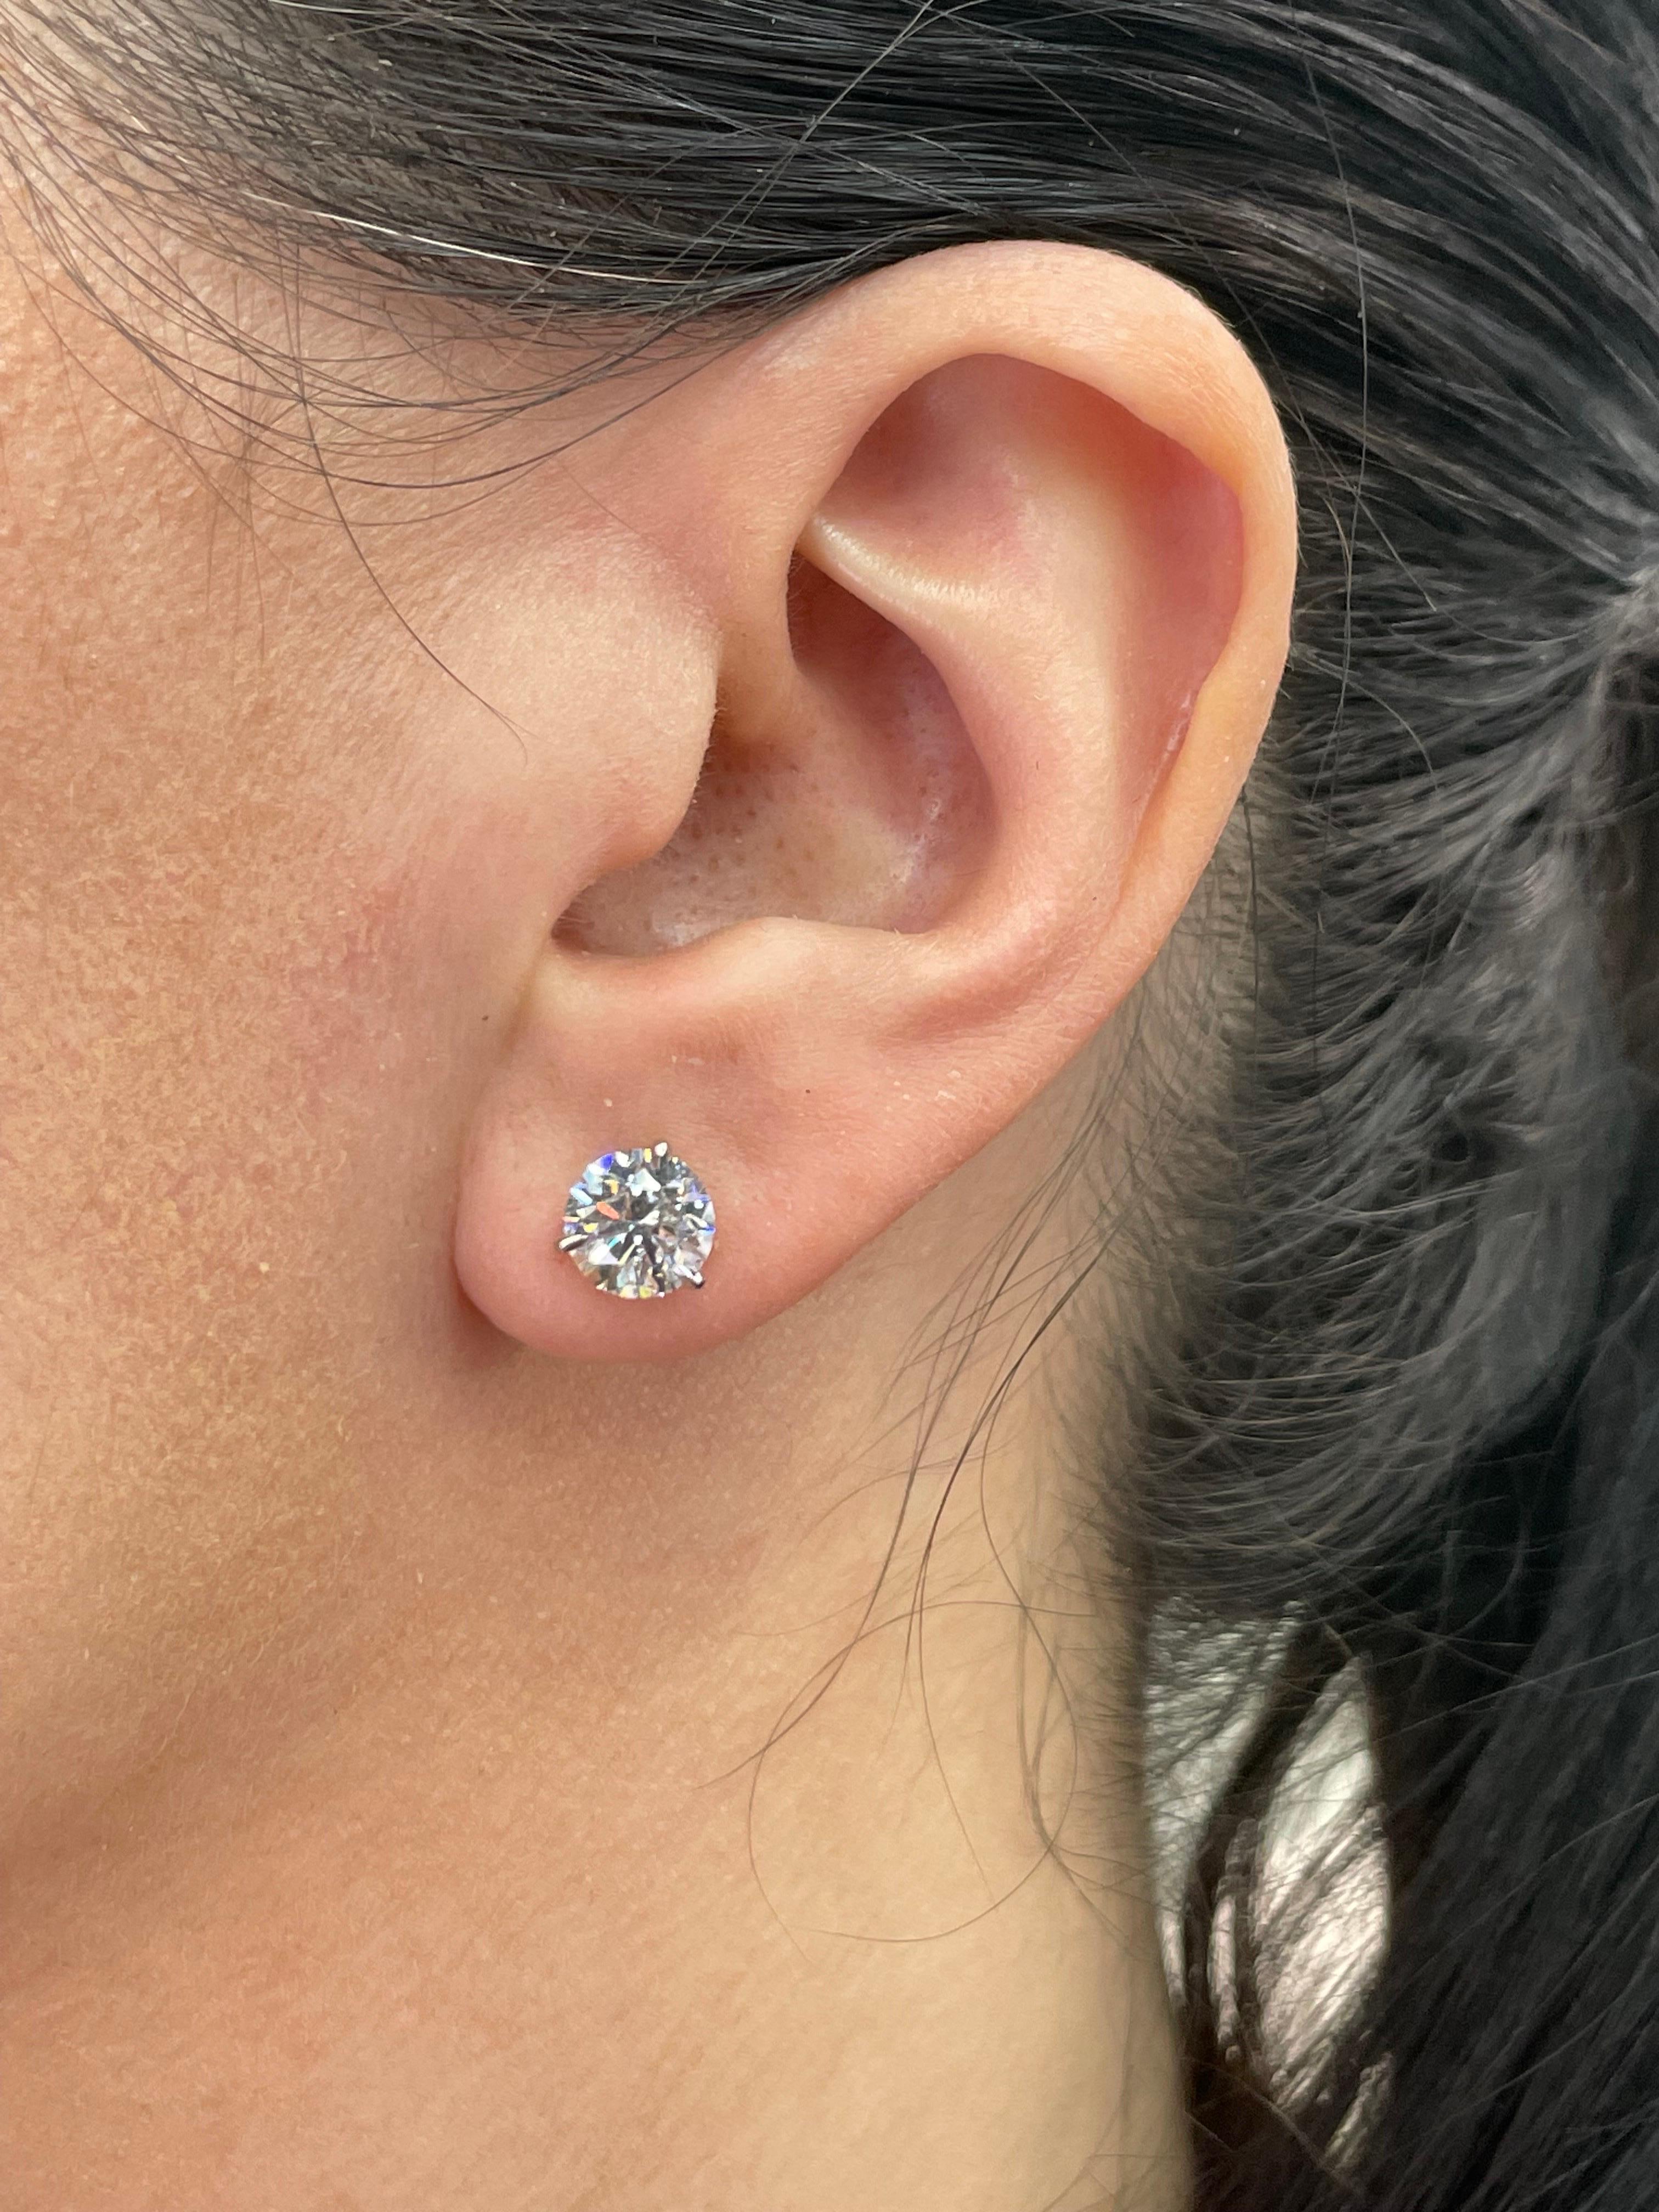 Diamond stud earrings weighing 3.15 Carats in a 3 prong Champagne setting, 18 Karat White Gold. 
Color G
Clarity SI2-3
Nice Color, Sparkle & Clean to the Eye

Diamonds are graded by our in house GIA Gemologist 
Call/Message us to discuss more in